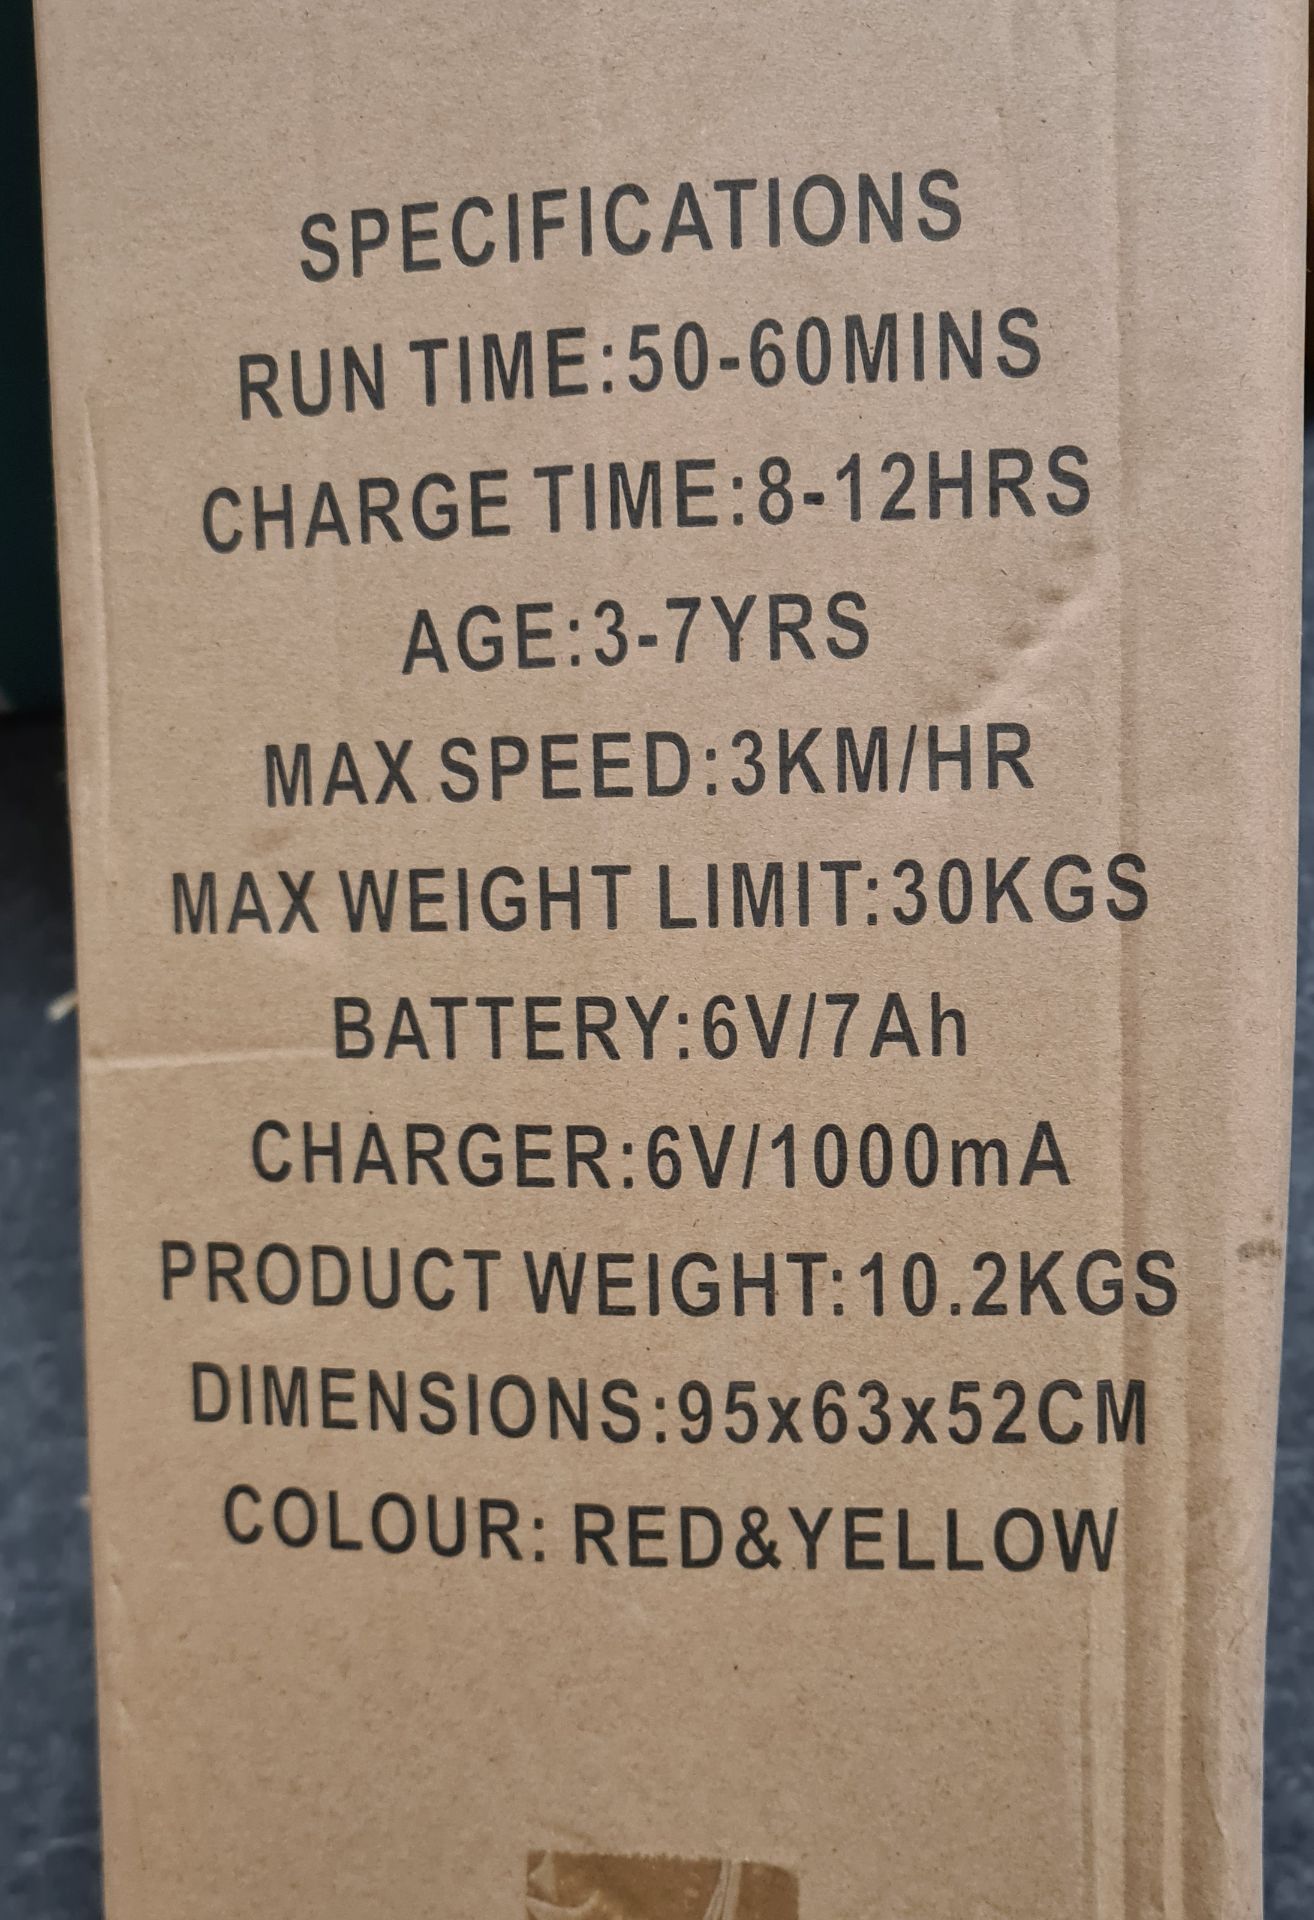 10 X ELECTRIC 6V RIDE ON GO KART - RED / YELLOW £1500 - BRAND NEW FOR KIDS - Image 10 of 10